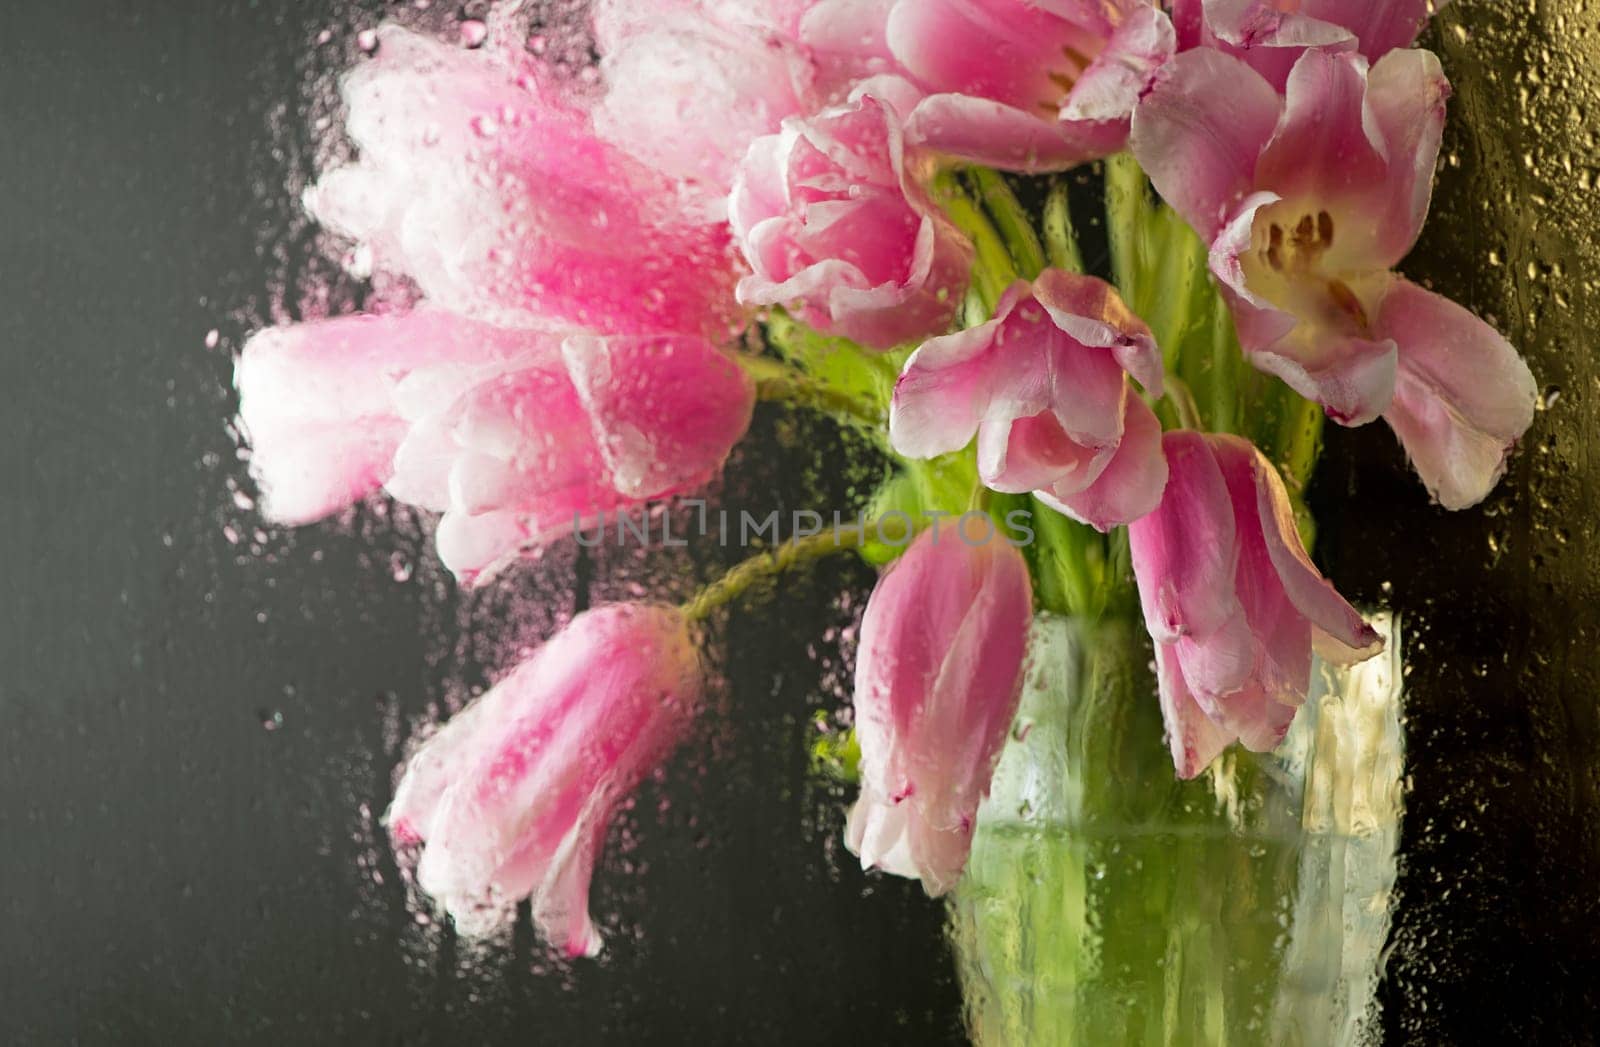 pink tulips on a black background through wet glass